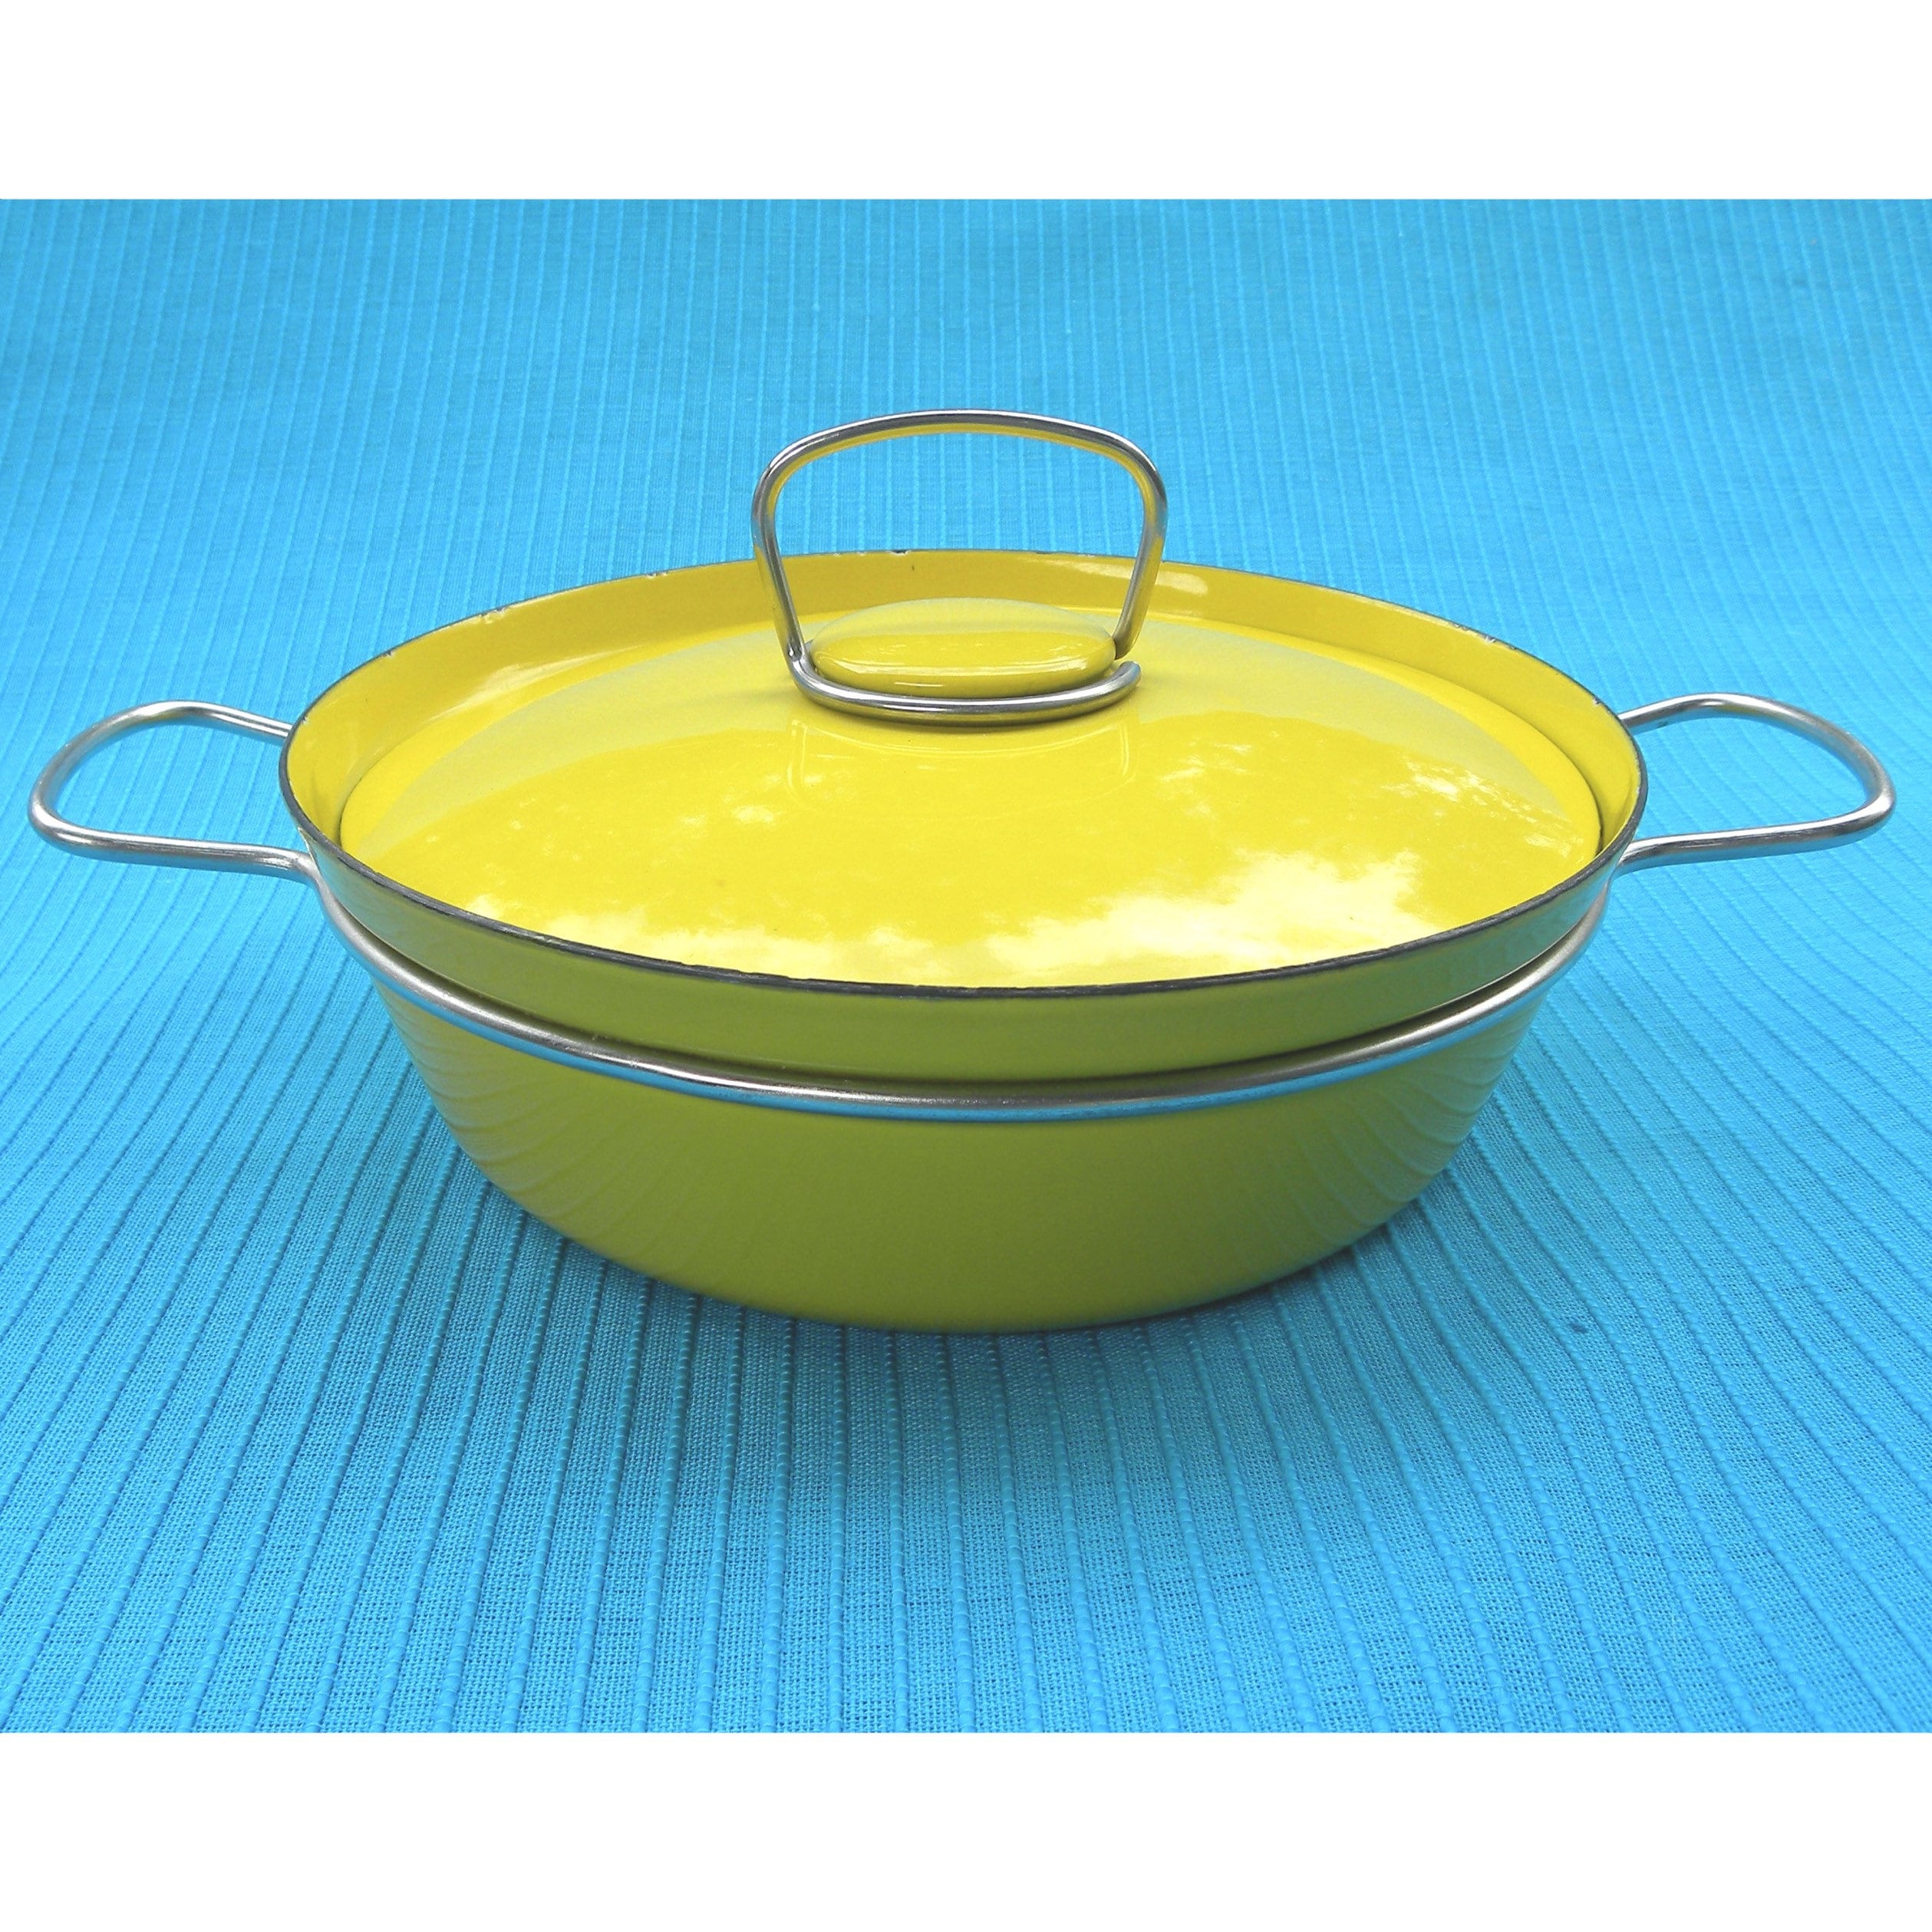 Kenmore 19247 5.5 Quart Cast Iron Enameled Coated Dutch Oven in Yellow